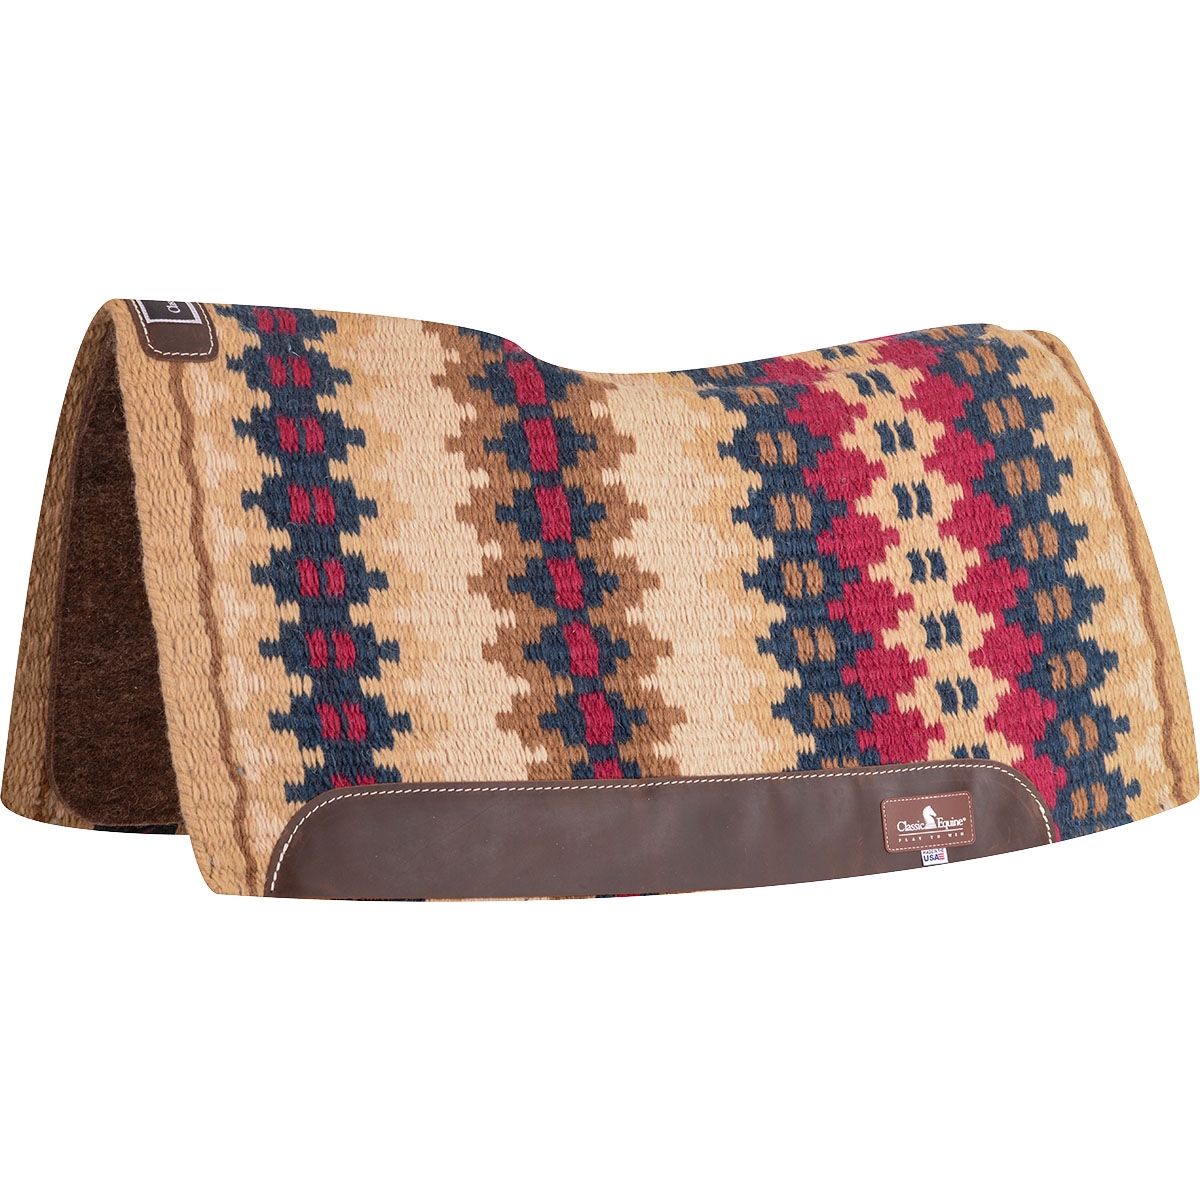 Classic Equine Blanket Top Saddle Pad with Alpaca Felt Bottom3, 3/4-inch  Thick